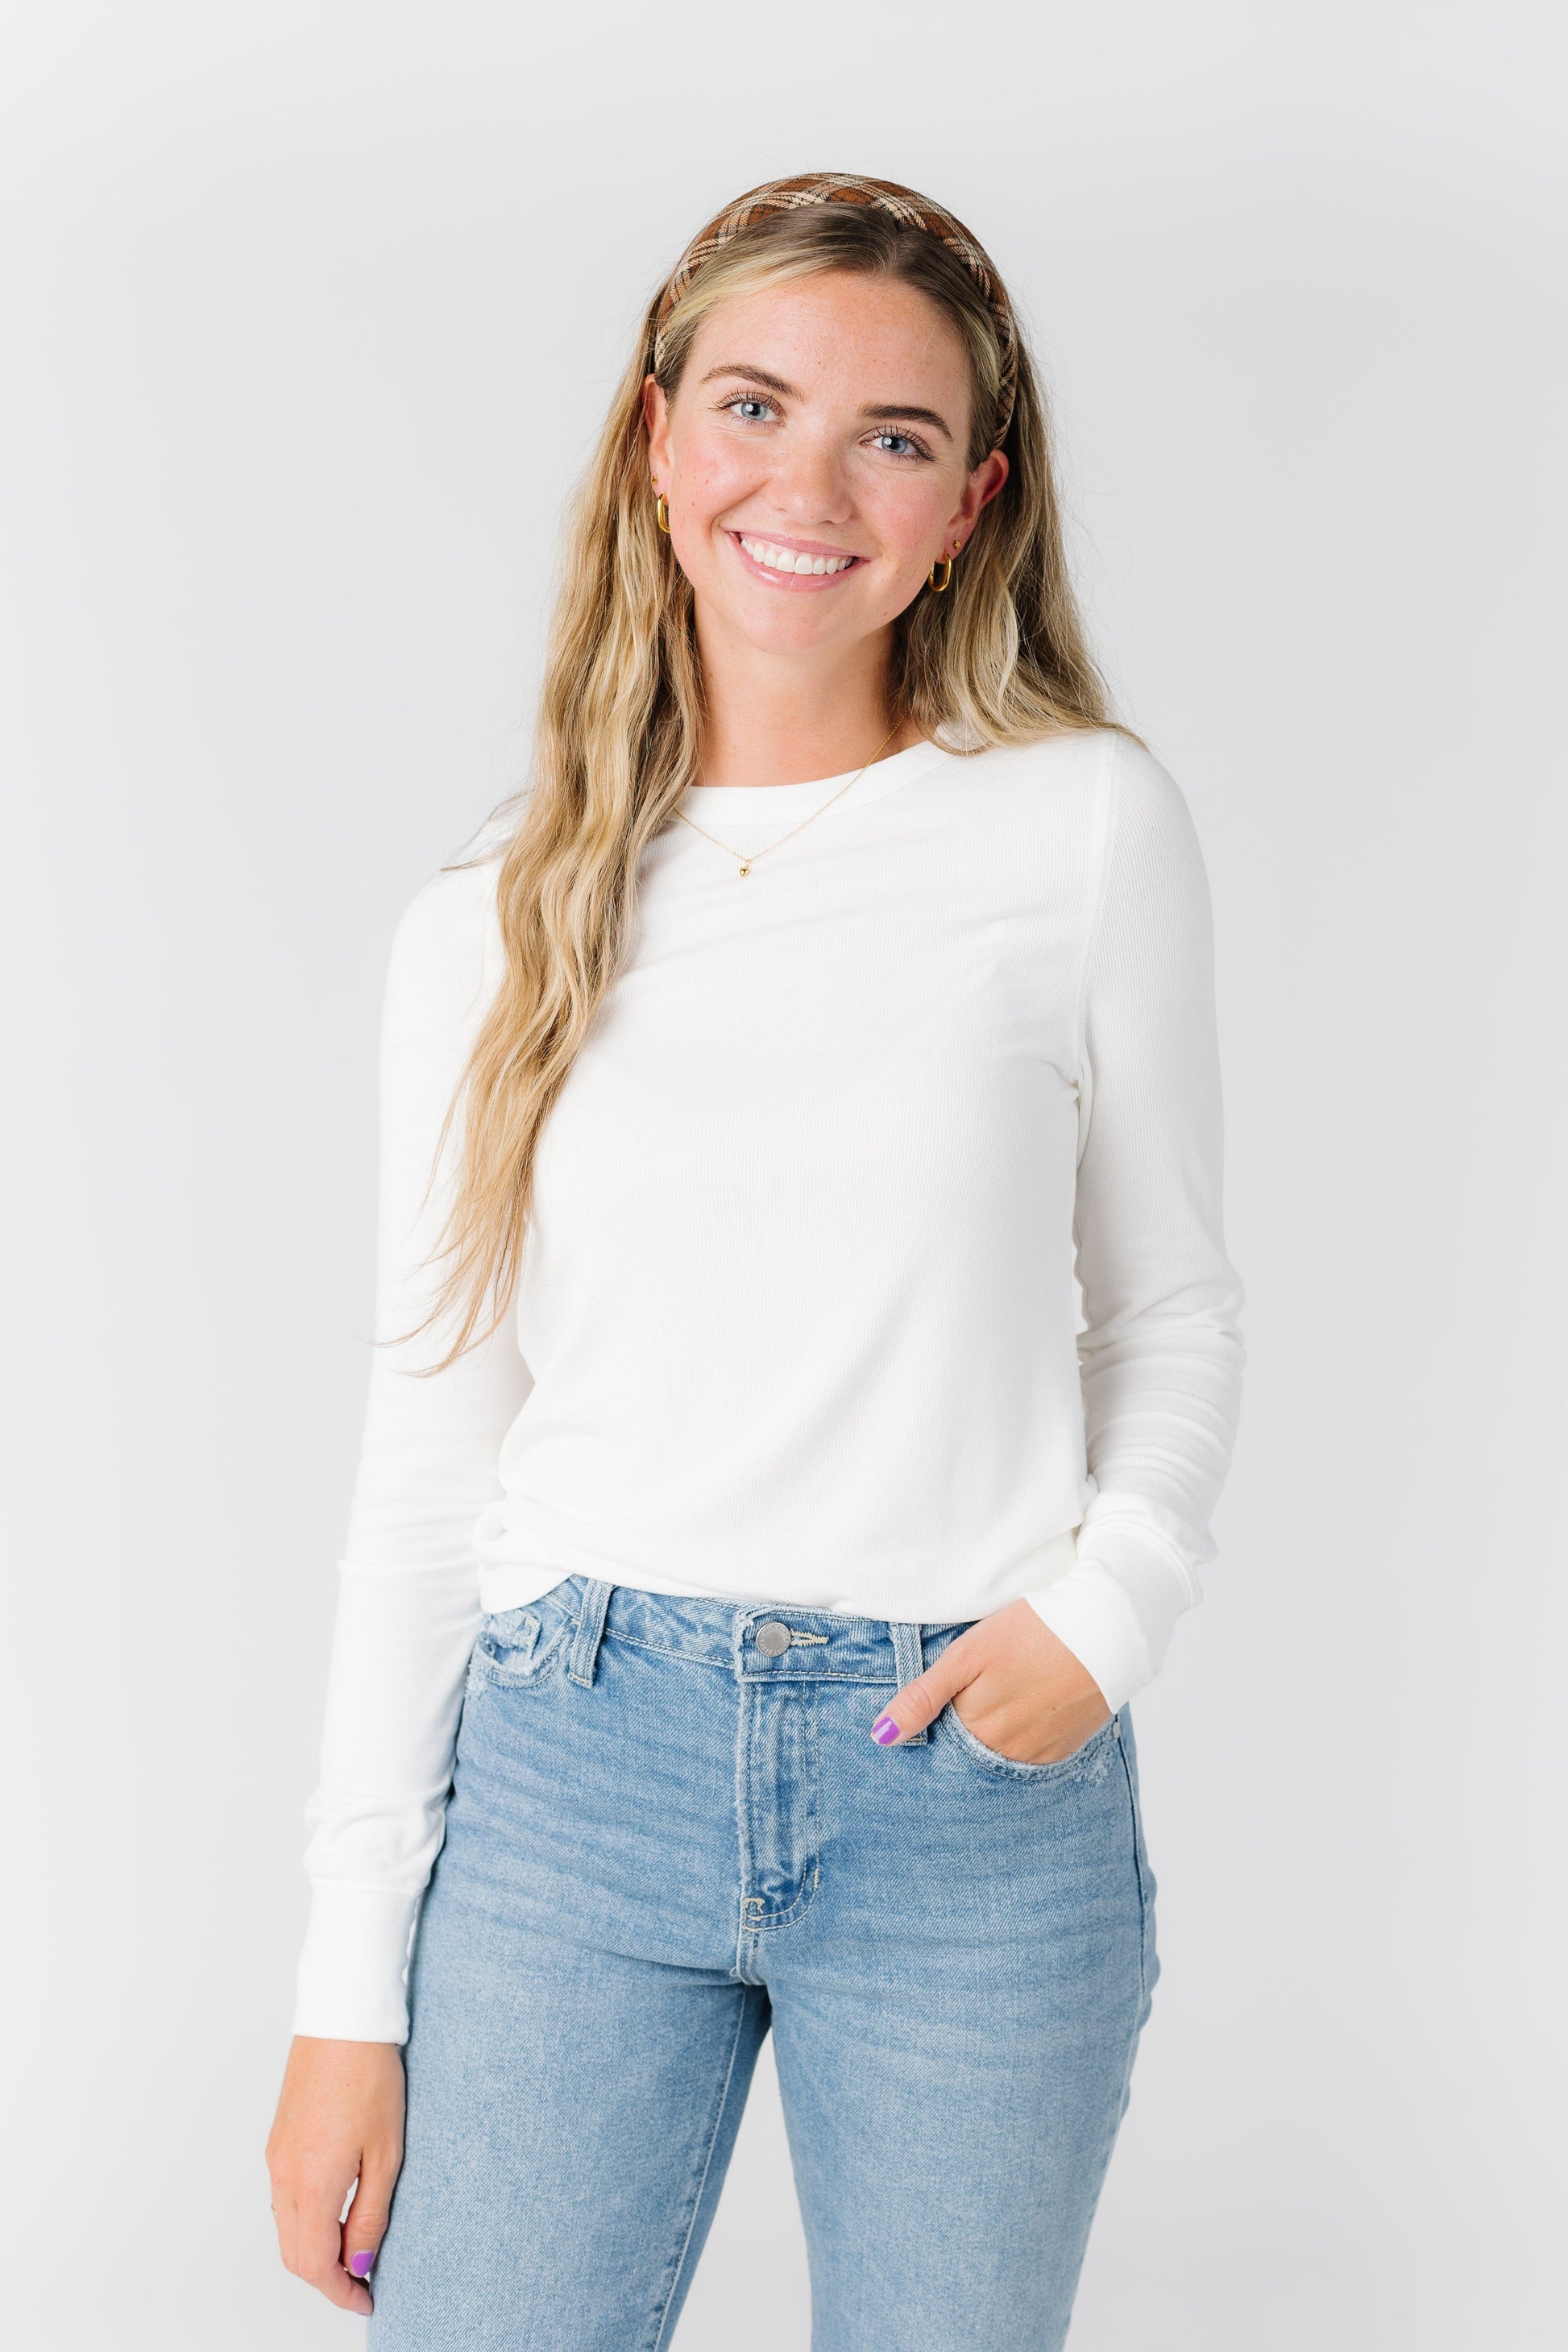 Stacy Top Women's Long Sleeve T Thread & Supply 